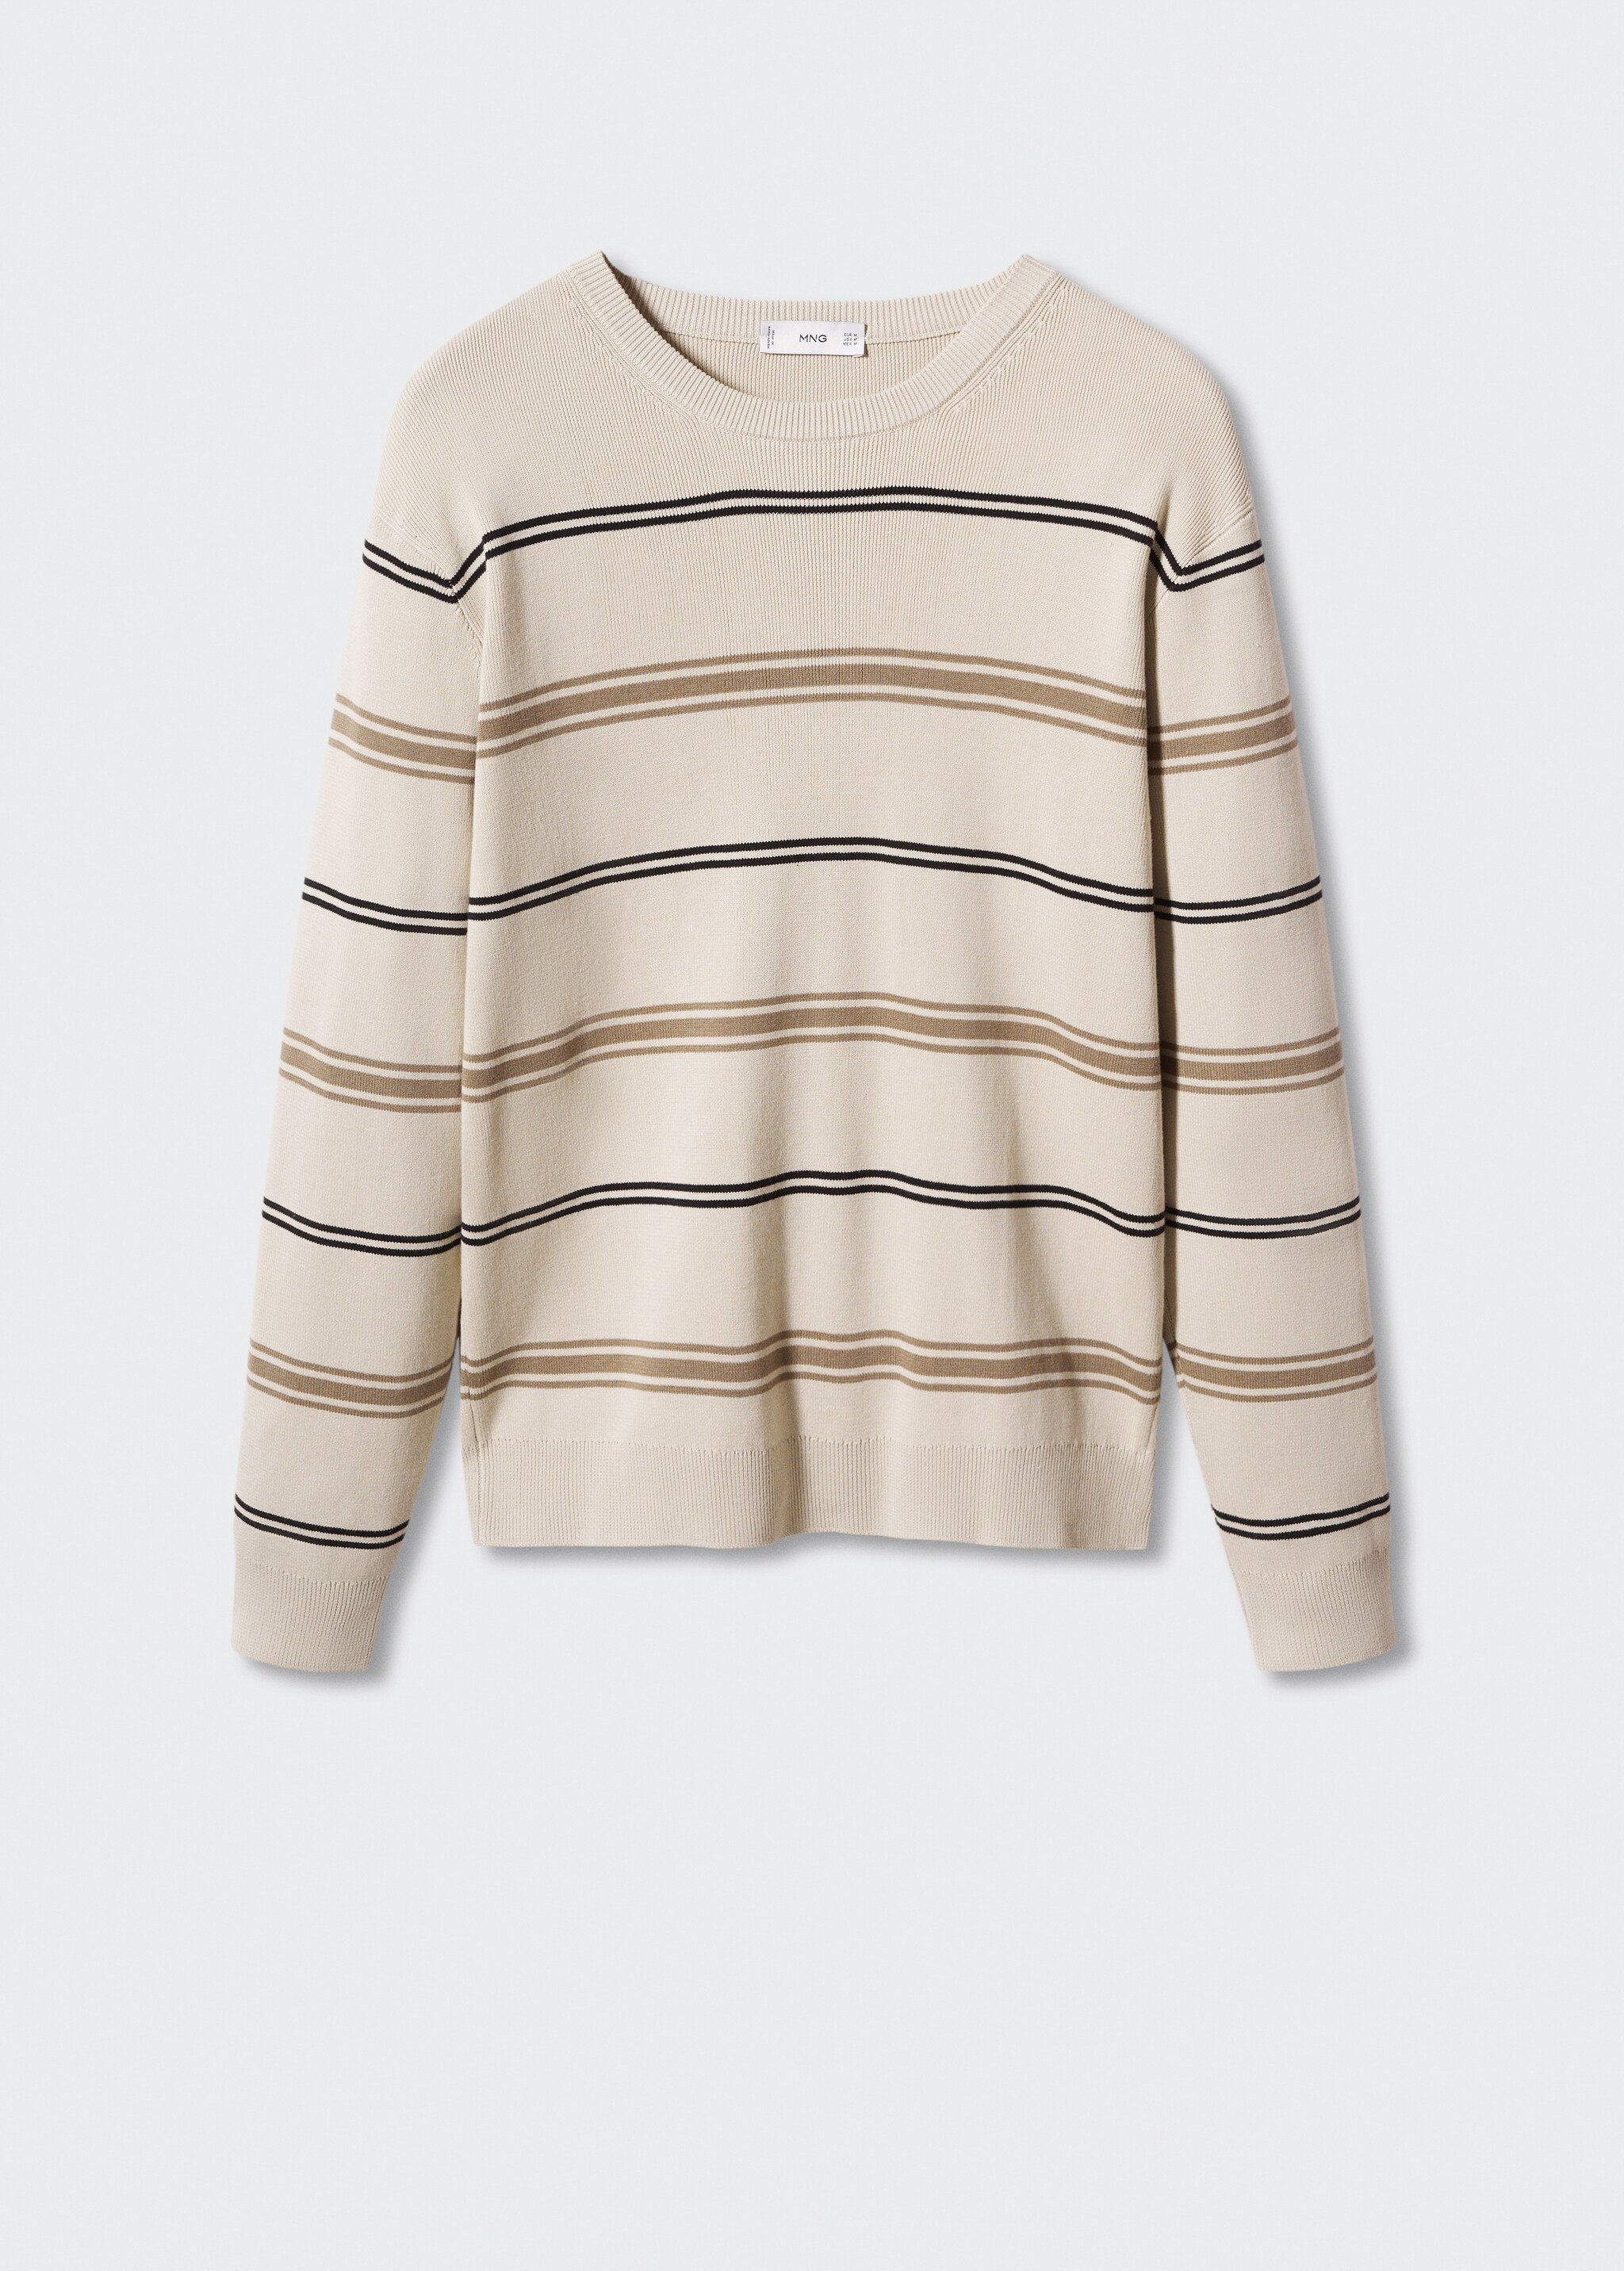 Striped cotton sweater - Article without model